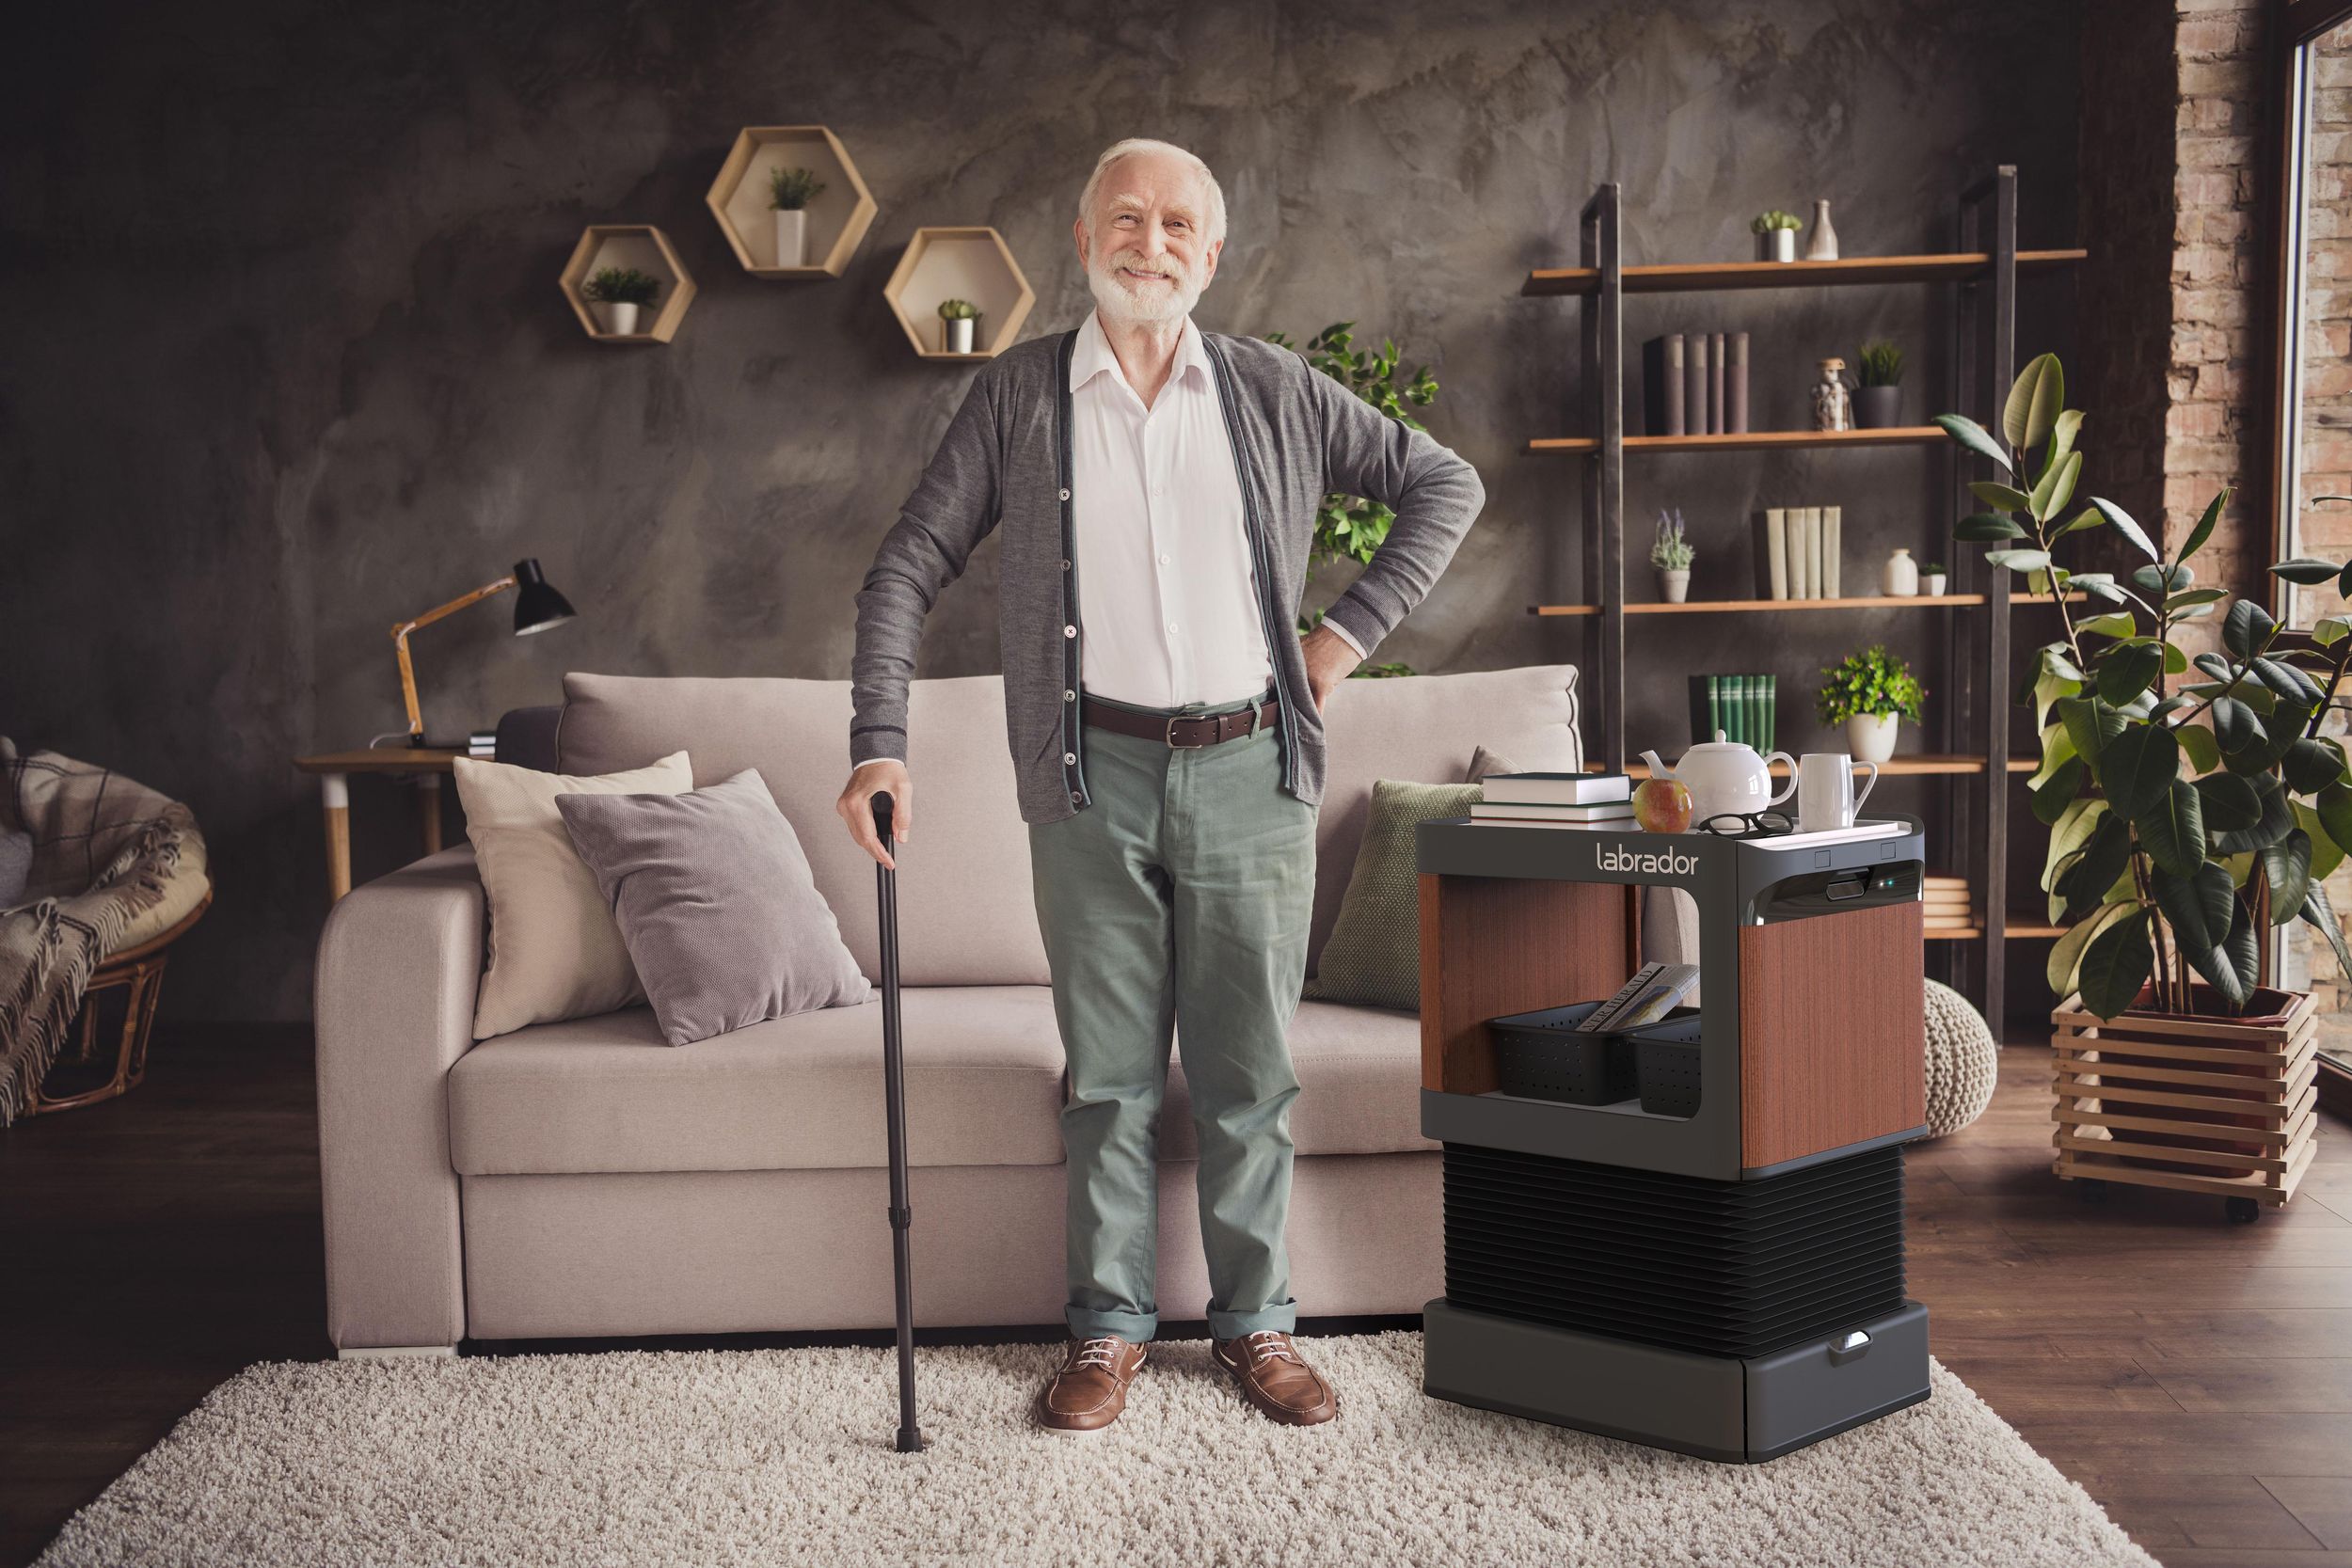 A man with a cane stands next to a robotic table in a living room.